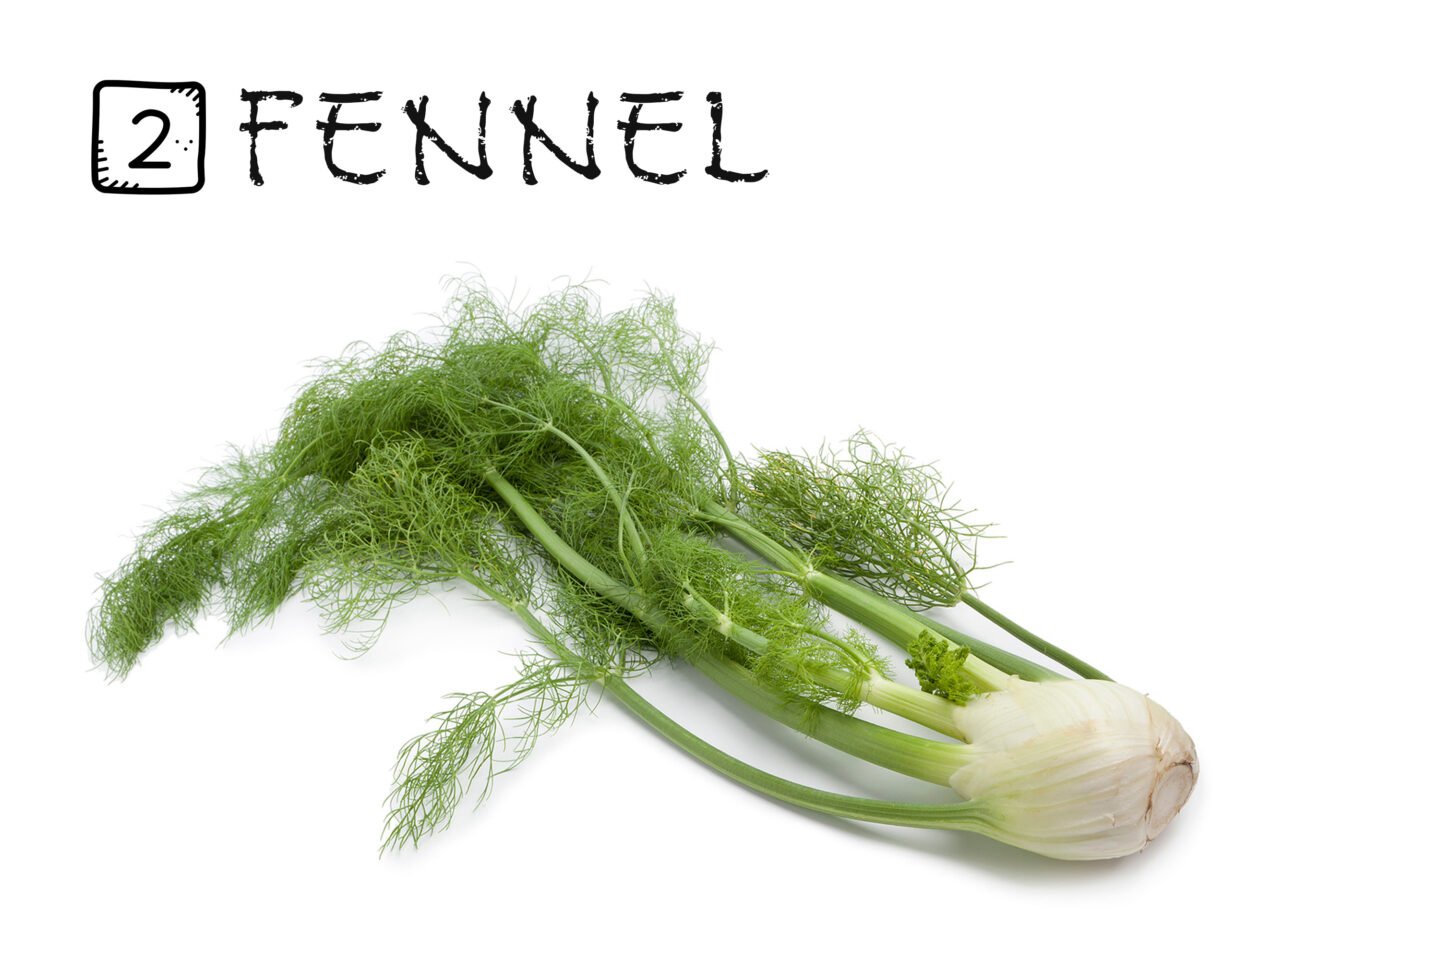 2 fennel fronds or leaves